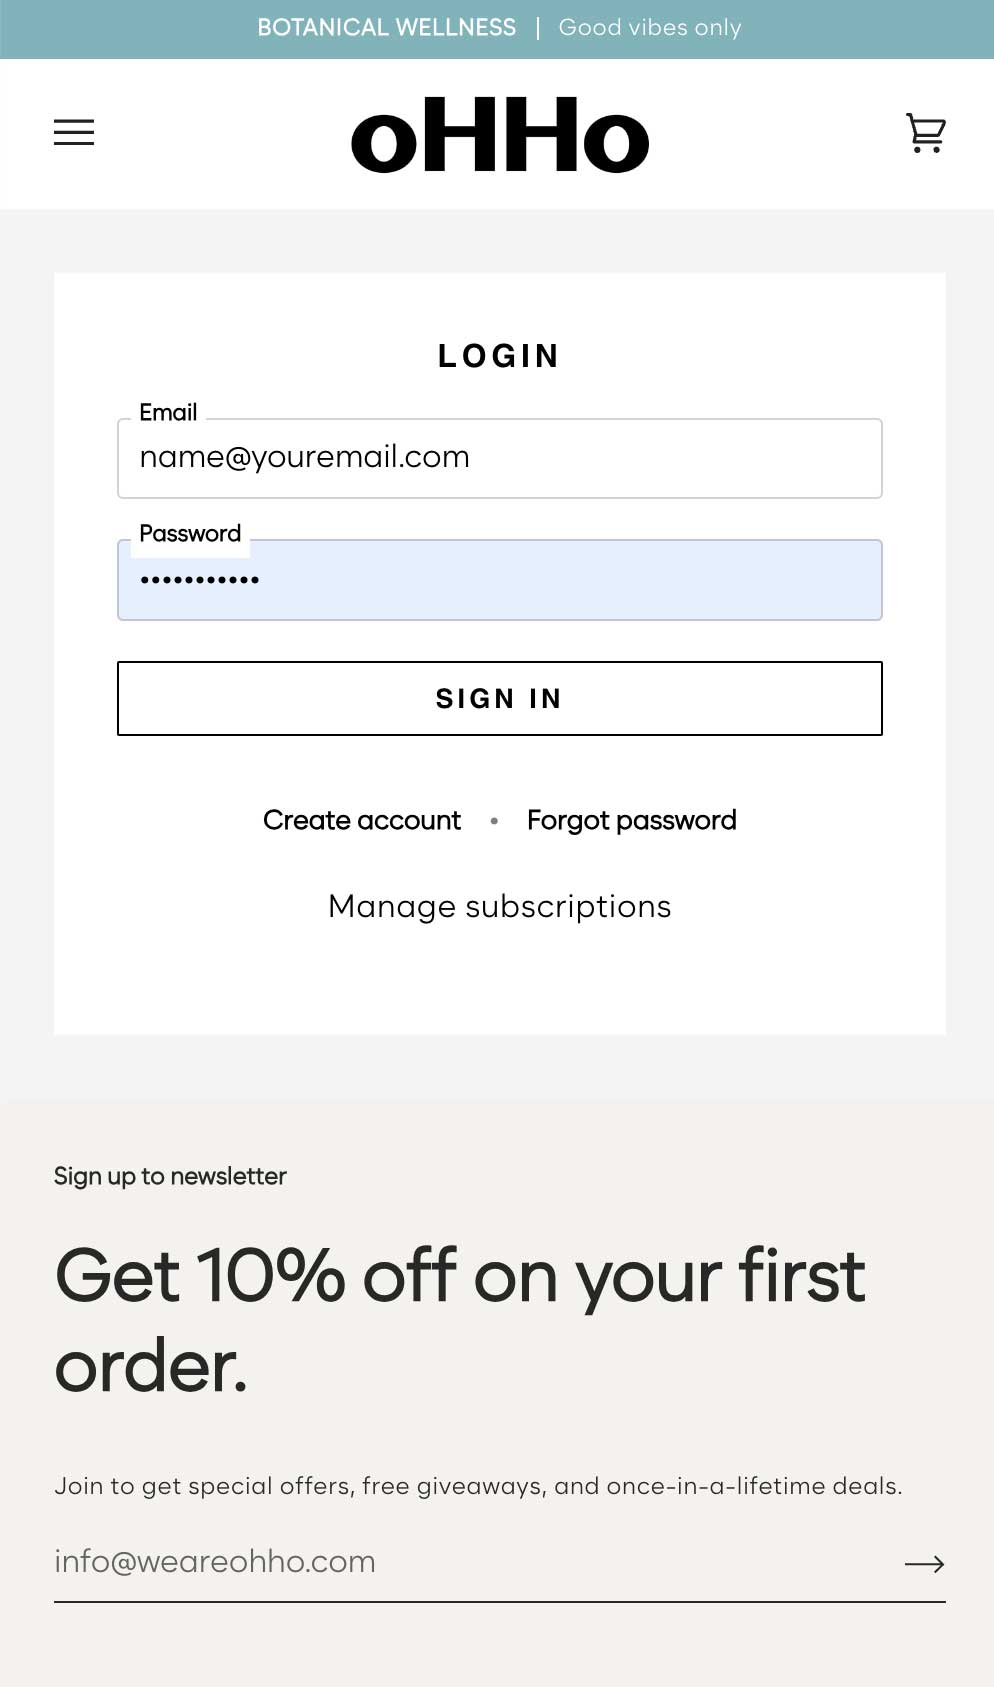 Sign into your account